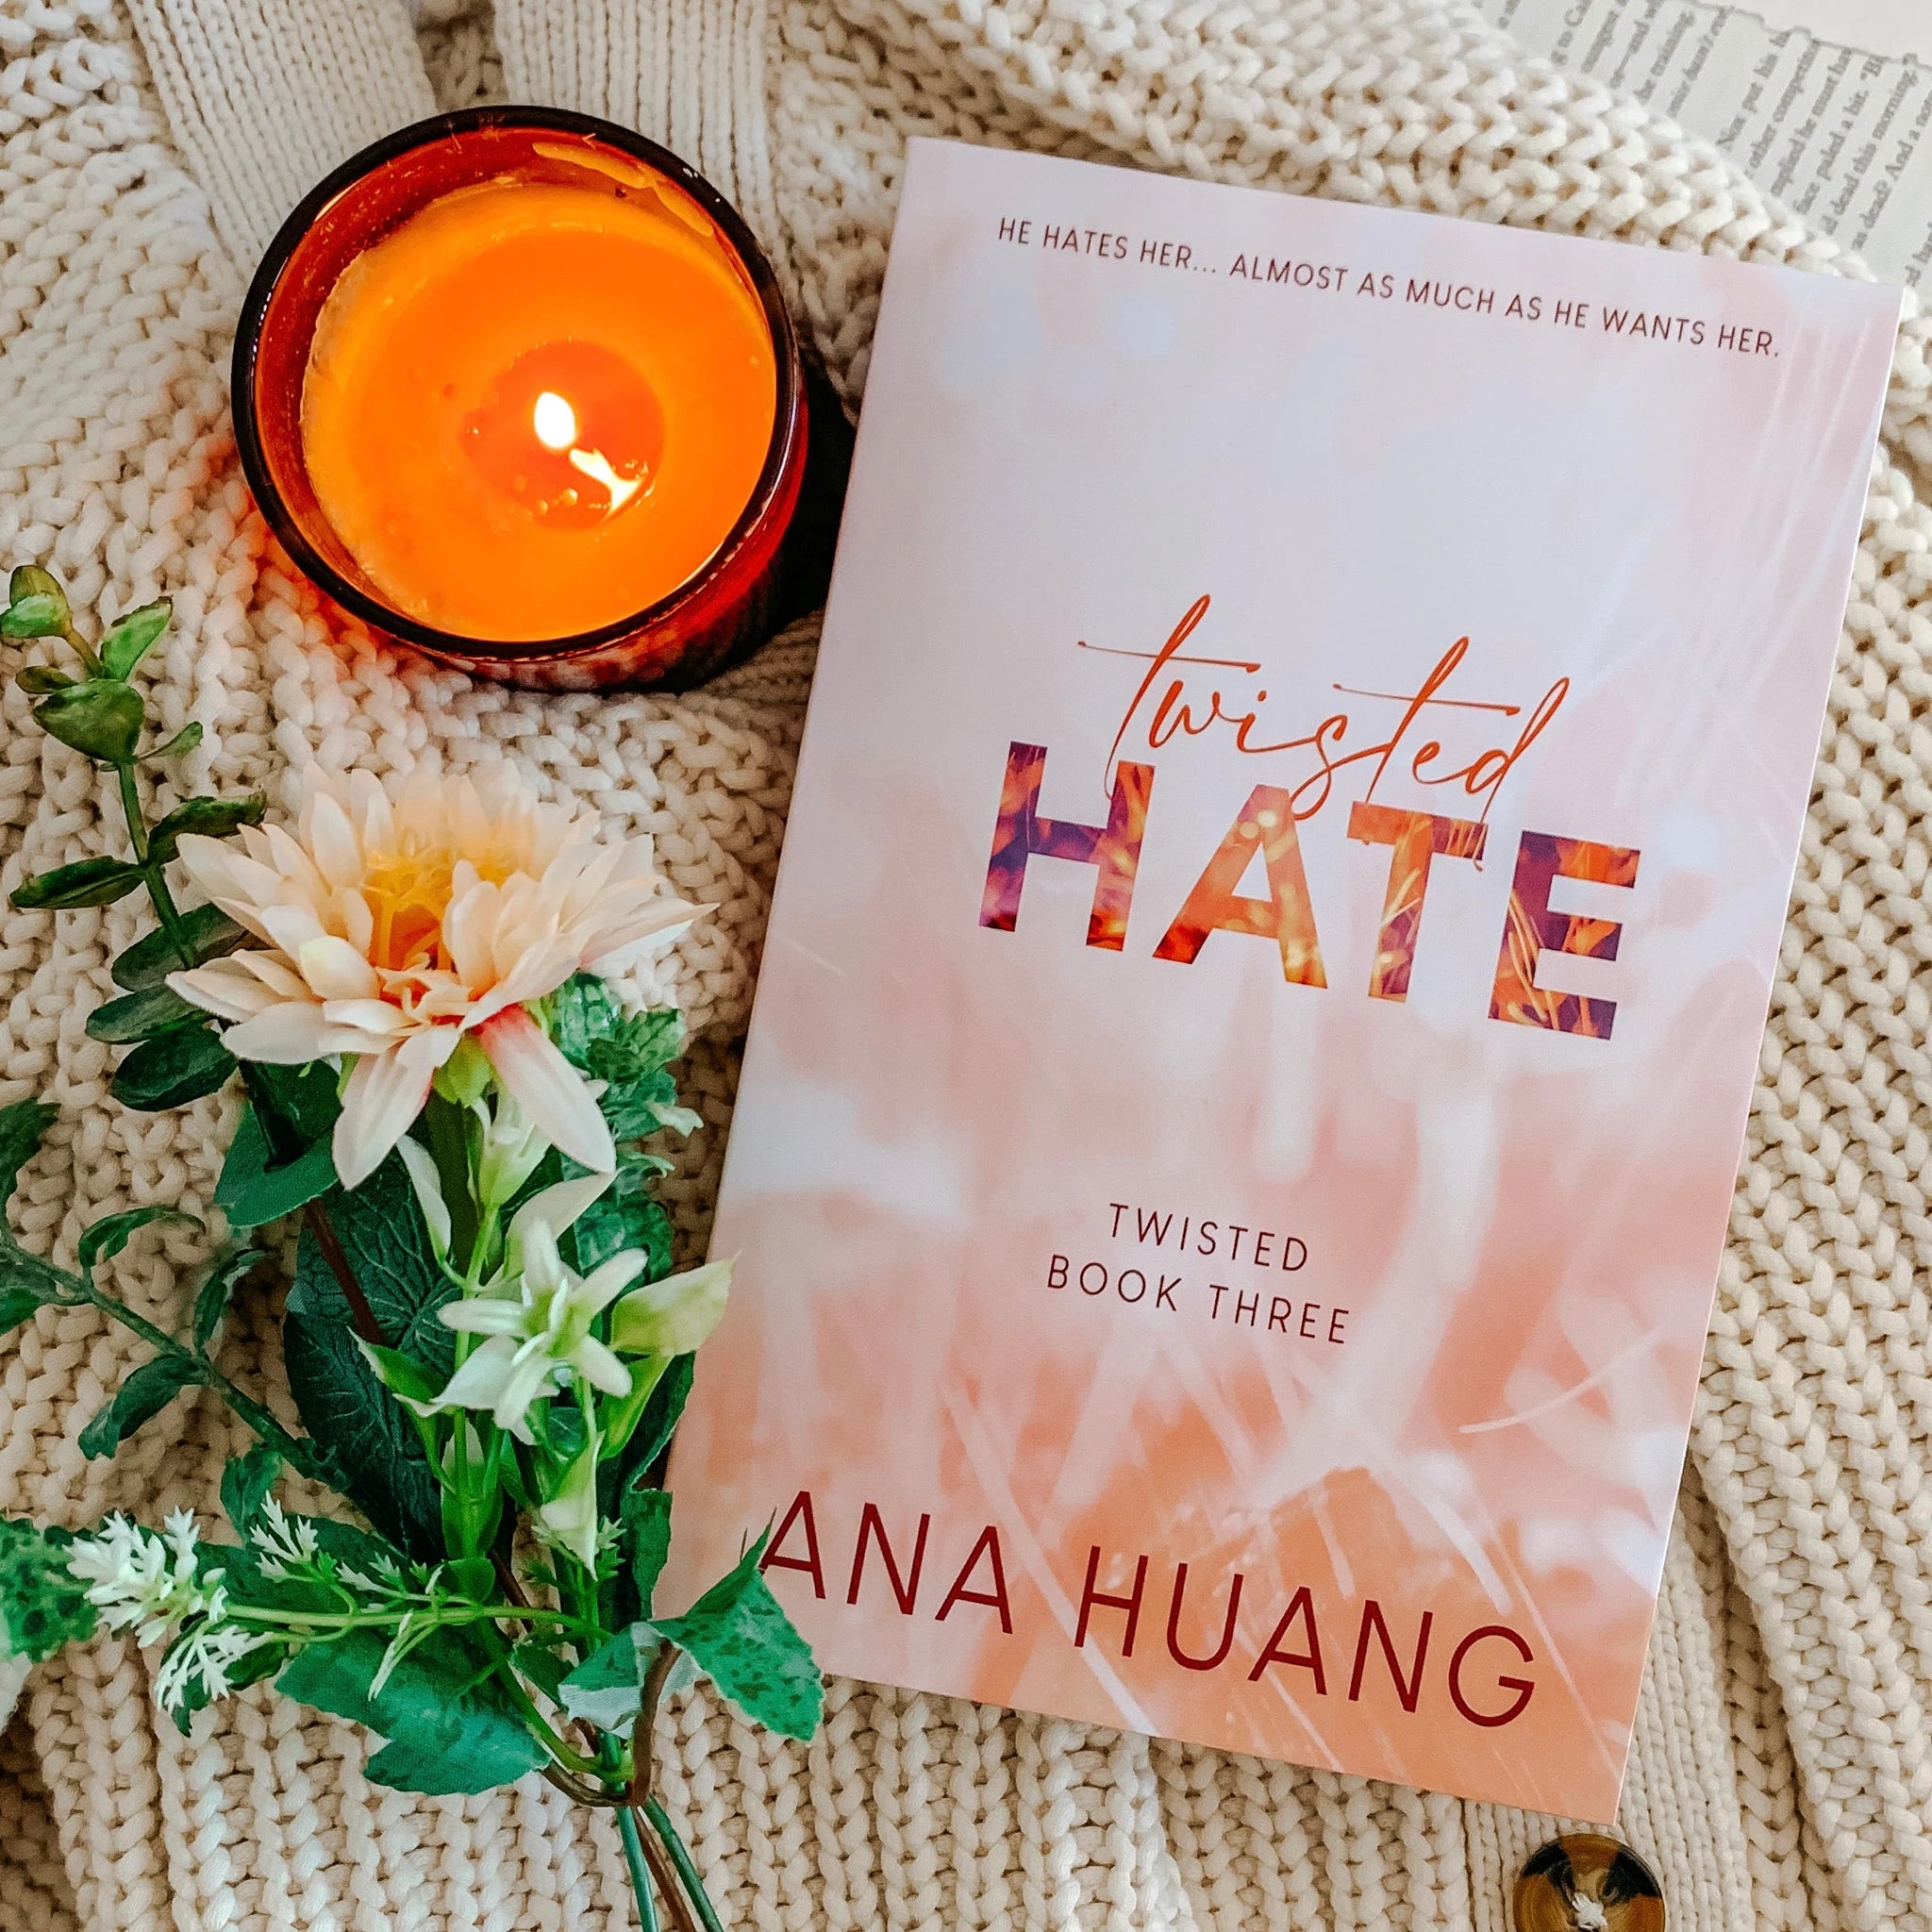 Twisted Hate - Special Edition by Ana Huang, Paperback